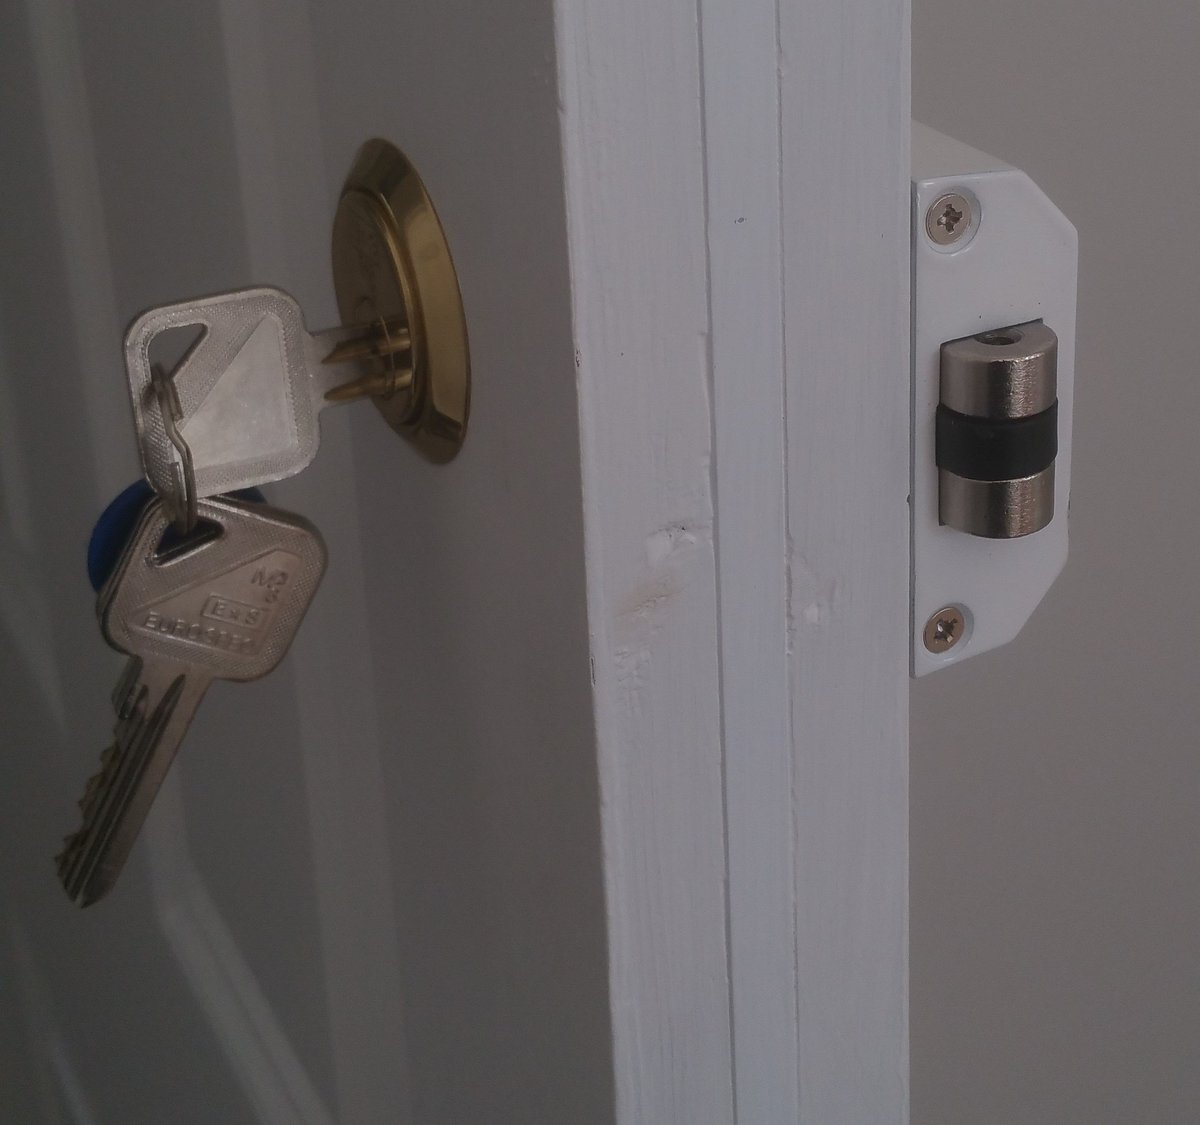 Fitted 3 fire rated rollerball nightlatch type locks to internal doors of a student let house today. Ideal for their security and the rollerball action (rather than latchbolt action) ensures no accidental lockouts.  #locksmith